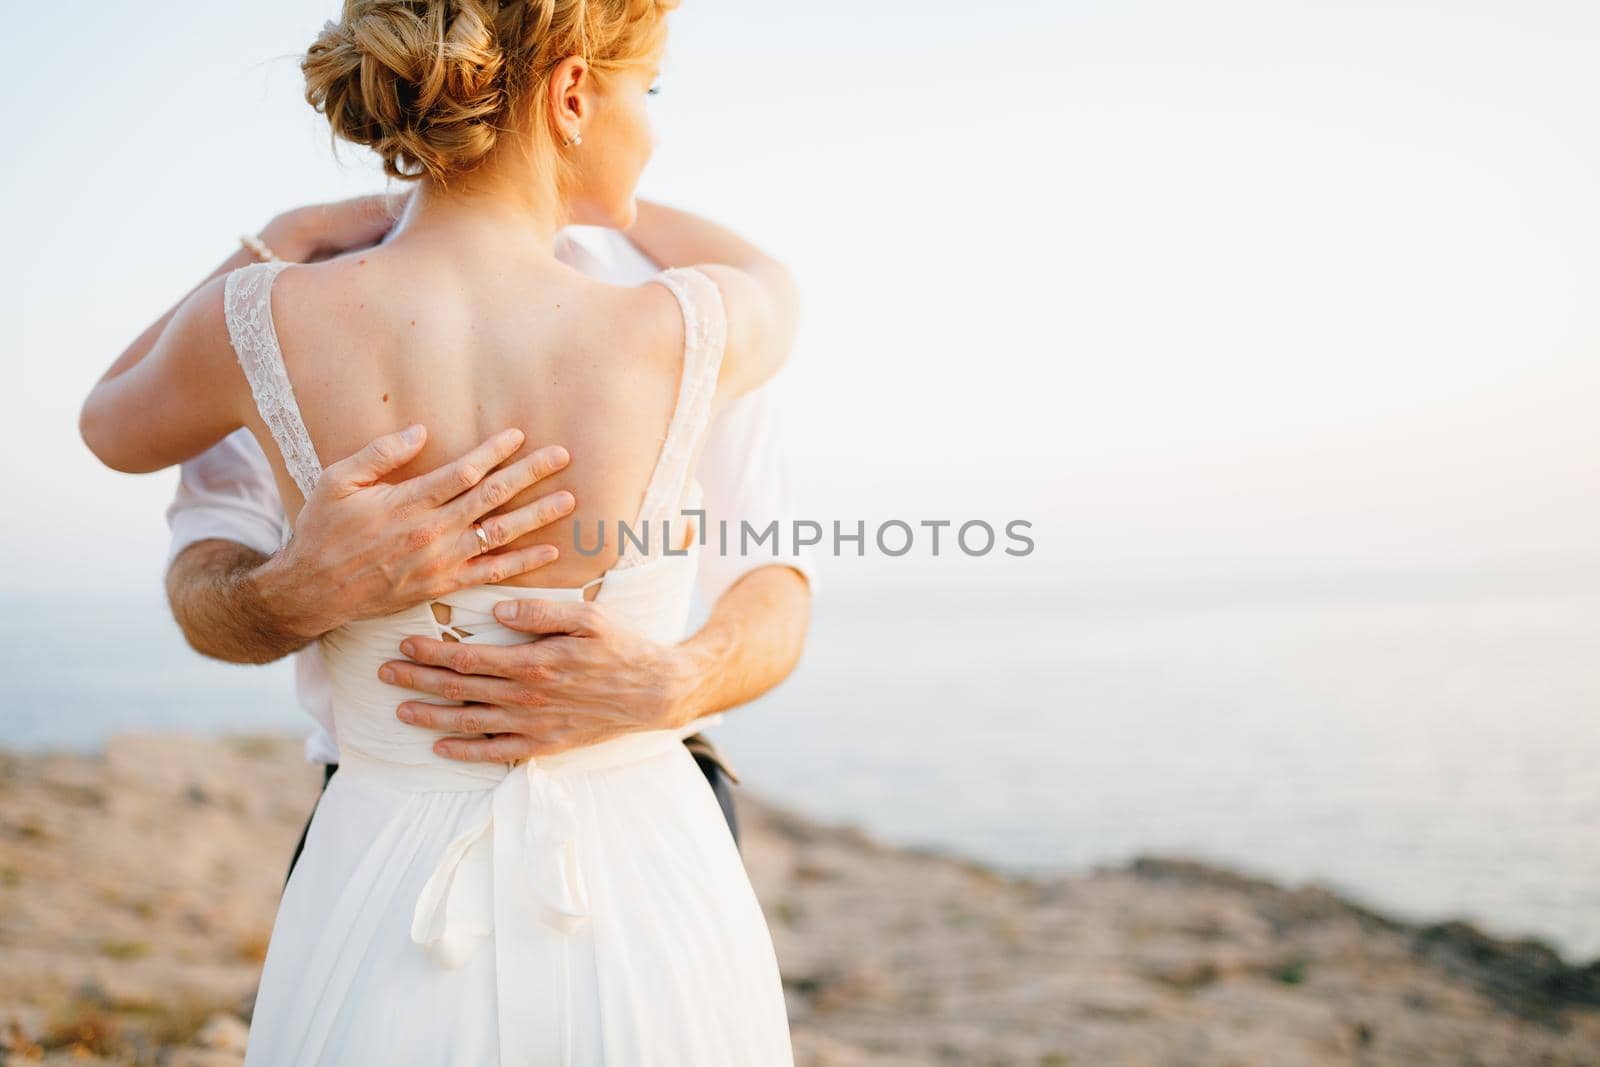 The bride and groom hug on the rocks by the sea against the backdrop of the mountains and the island of Mamula, back view by Nadtochiy